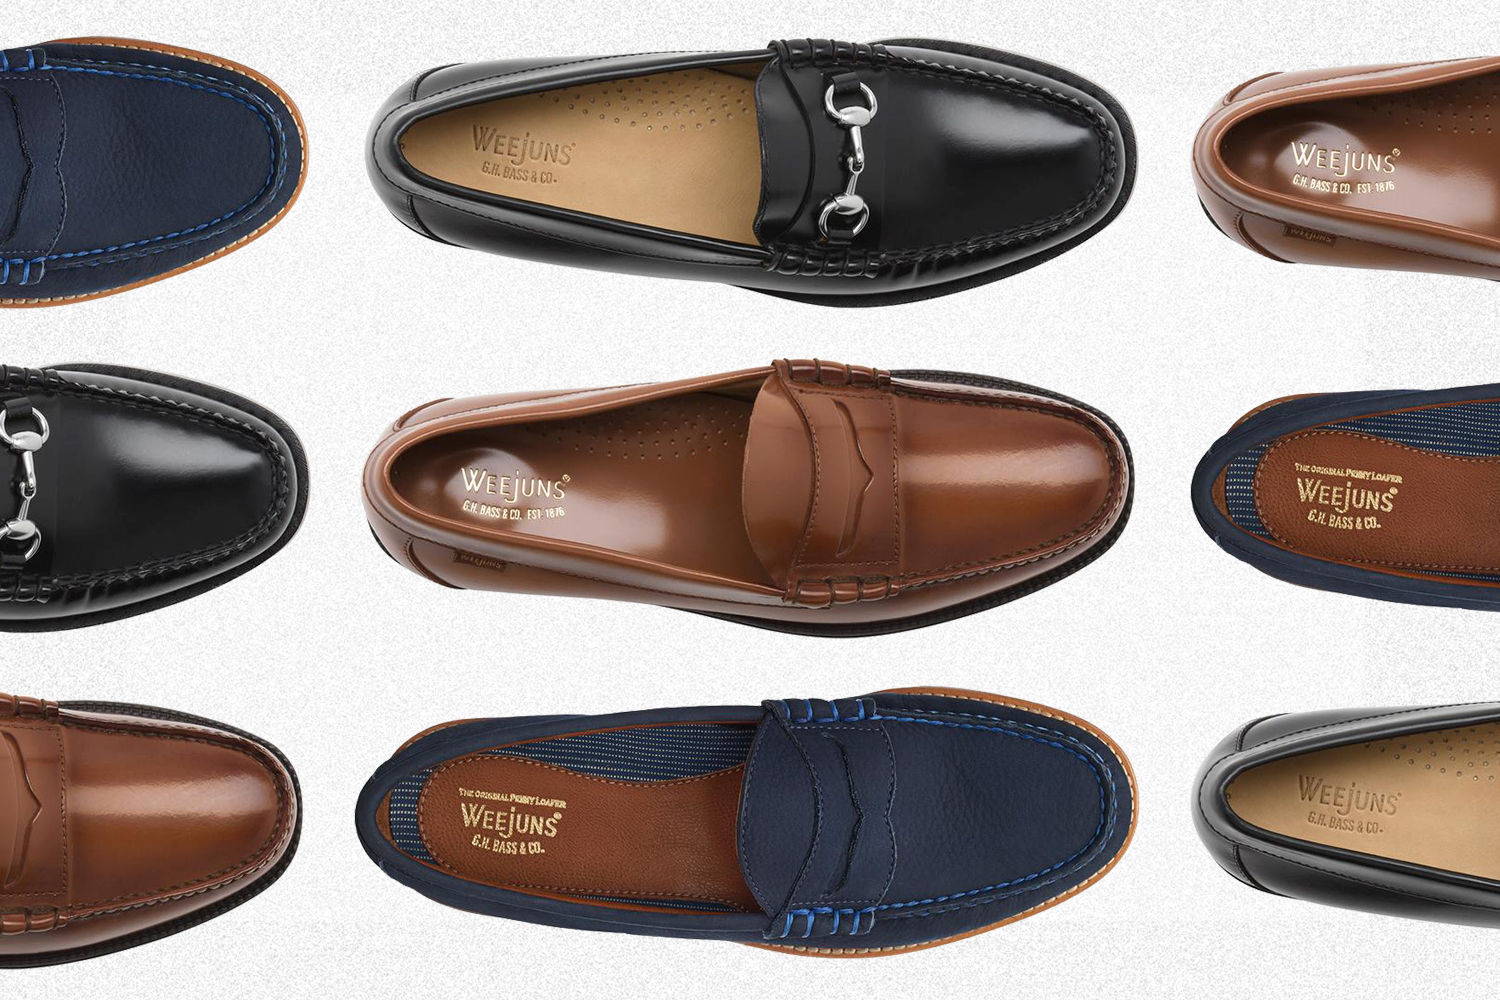 Take Up to 60% Weejuns Loafers at G.H. Bass & Co. - InsideHook